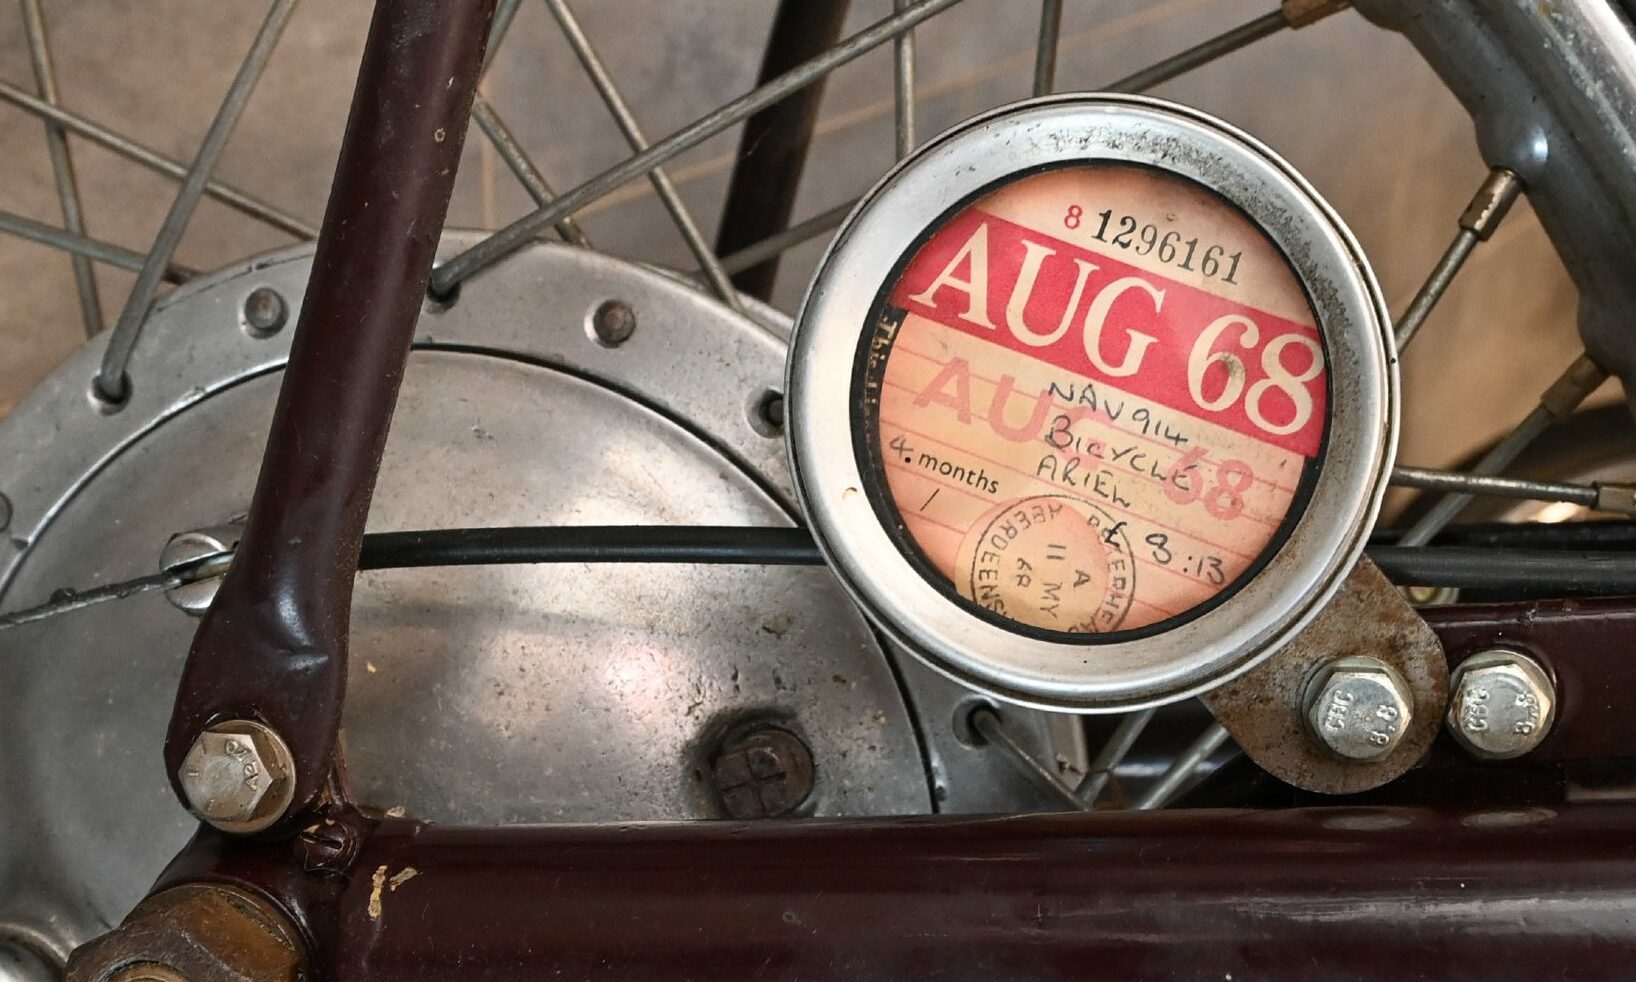 The Ariel Red Hunter still has a tax disc from 1968. Image: Kenny Elrick/ DC Thomson